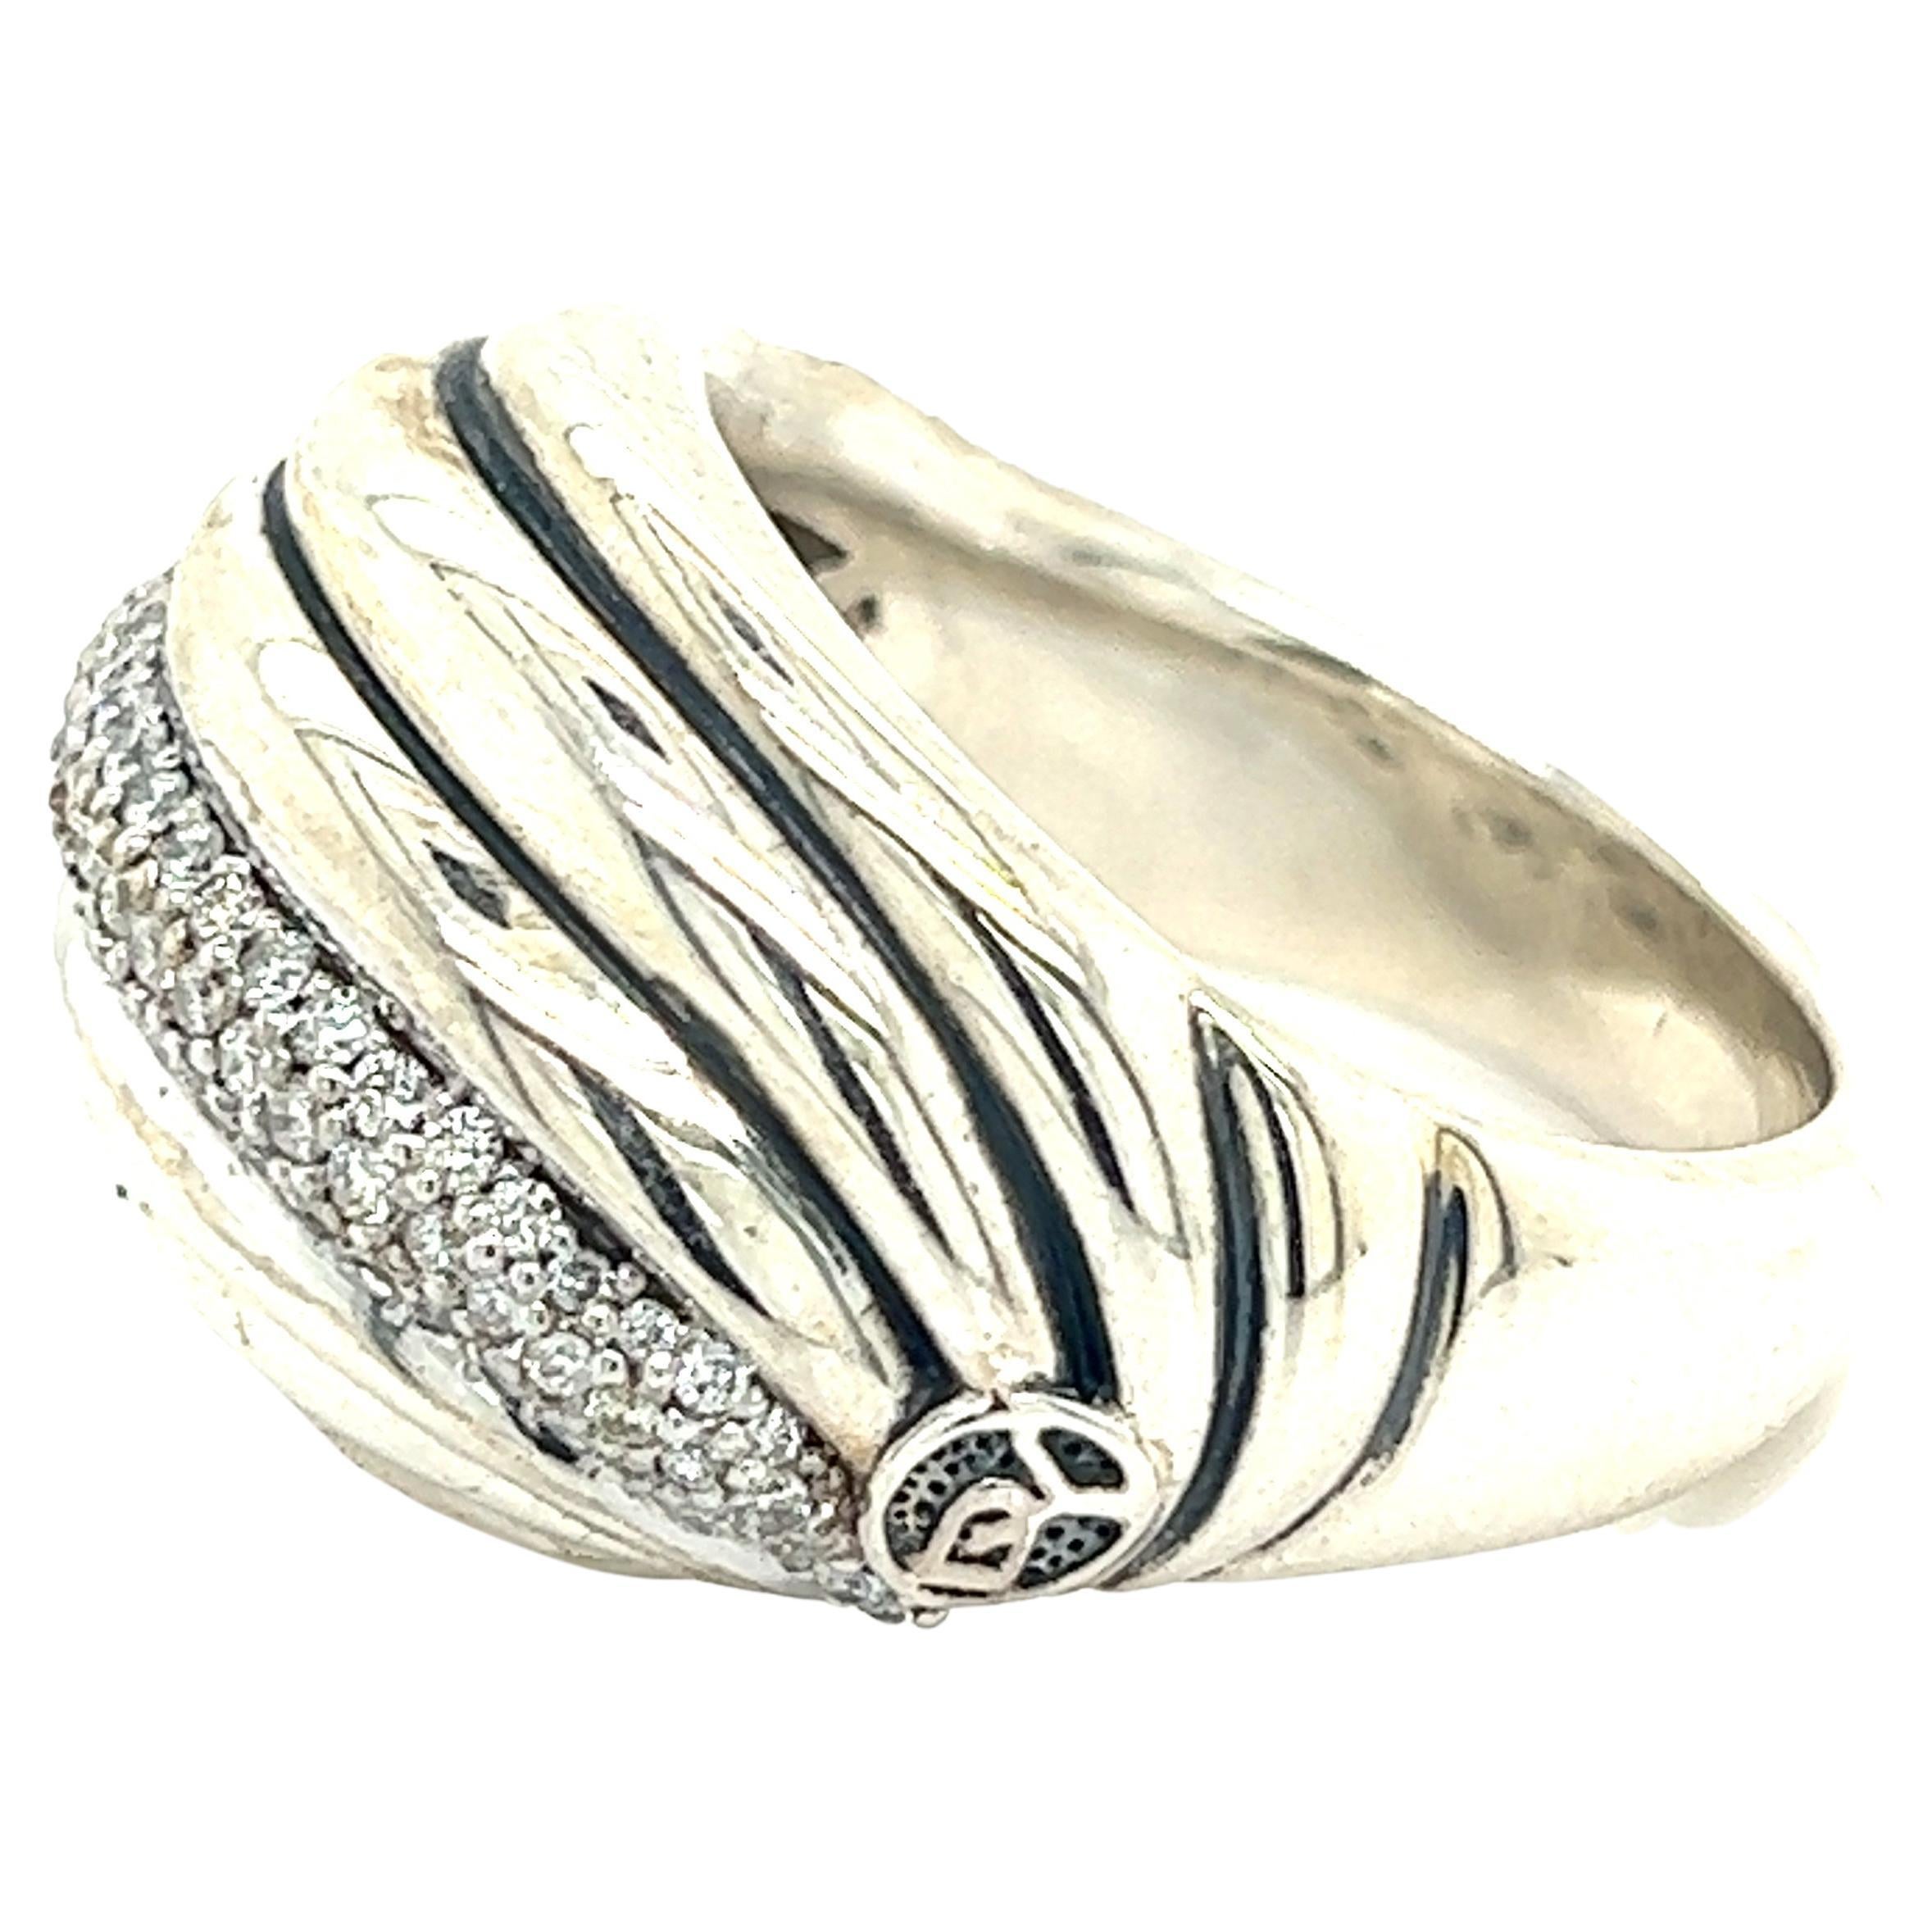 David Yurman Authentic Estate Diamond Sculpted Cable Ring 7.75 Silver DY210

$1800

This elegant Authentic David Yurman ring is made of sterling silver.

TRUSTED SELLER SINCE 2002

PLEASE SEE OUR HUNDREDS OF POSITIVE FEEDBACKS FROM OUR